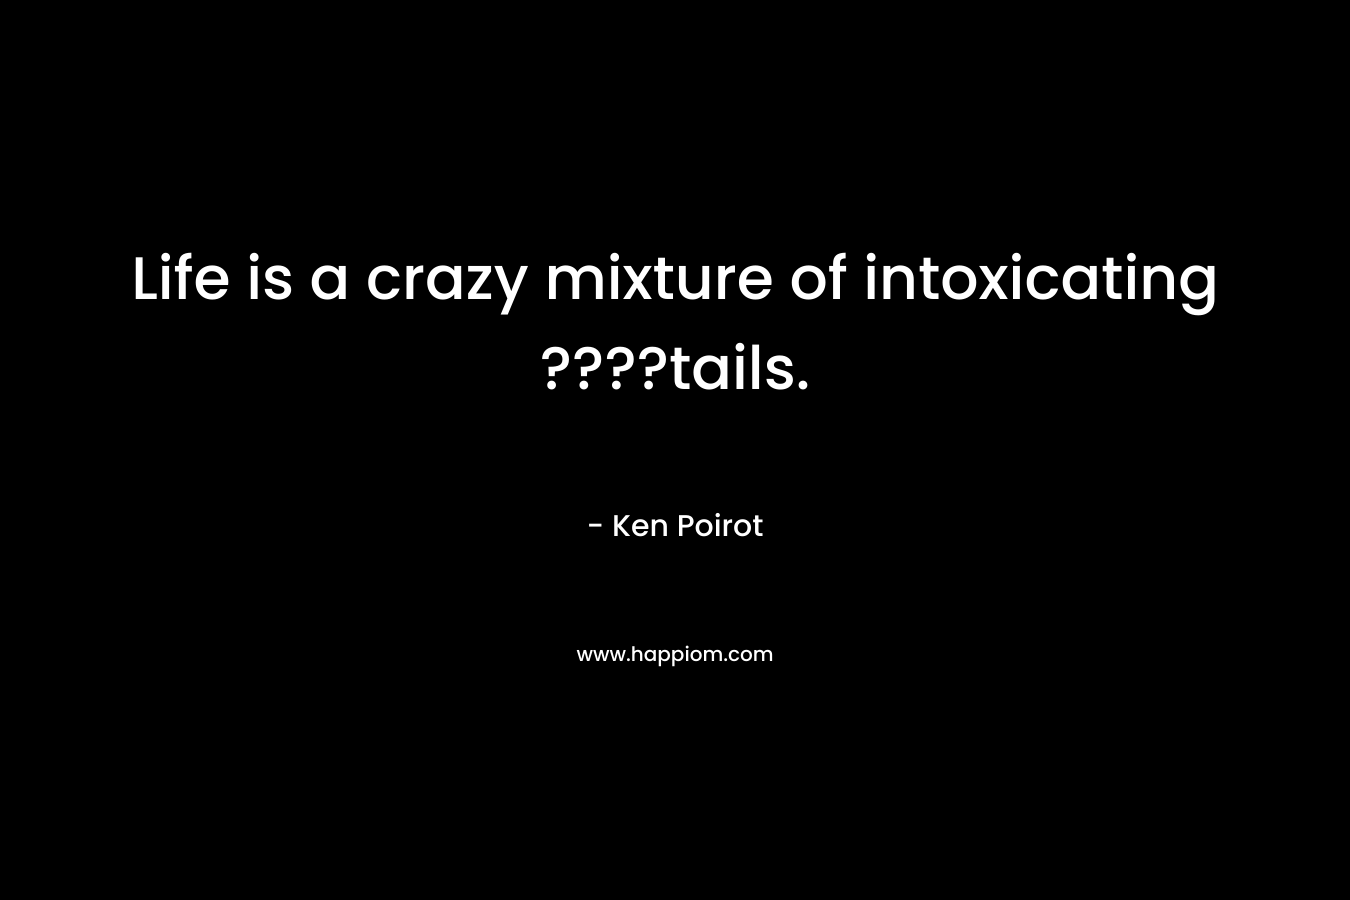 Life is a crazy mixture of intoxicating ????tails.